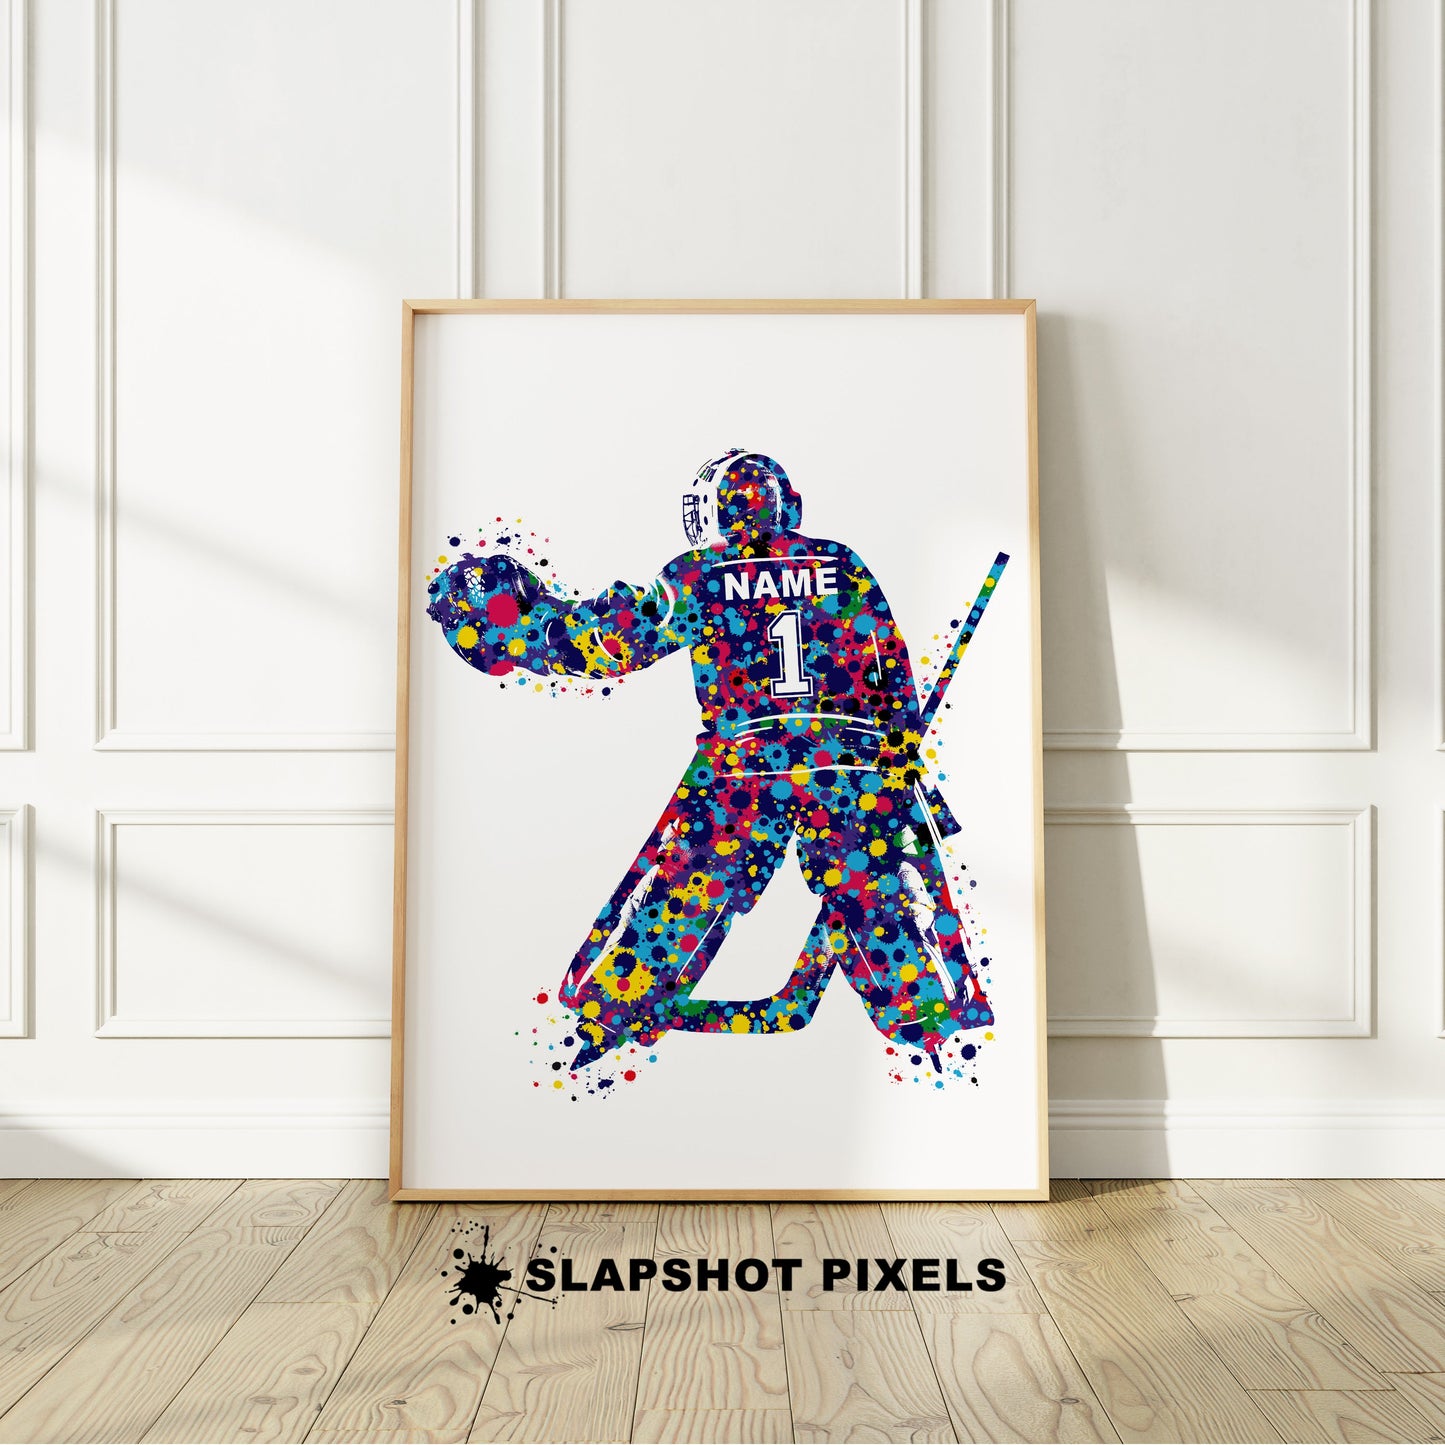 Personalized goalie hockey poster showing back of a goalie hockey player with custom name and number on the hockey jersey. Designed in watercolor splatters. Choose your preferred color. Perfect hockey gifts for boys, hockey team gifts, hockey coach gift, hockey wall art décor in a hockey bedroom and birthday gifts for hockey players.